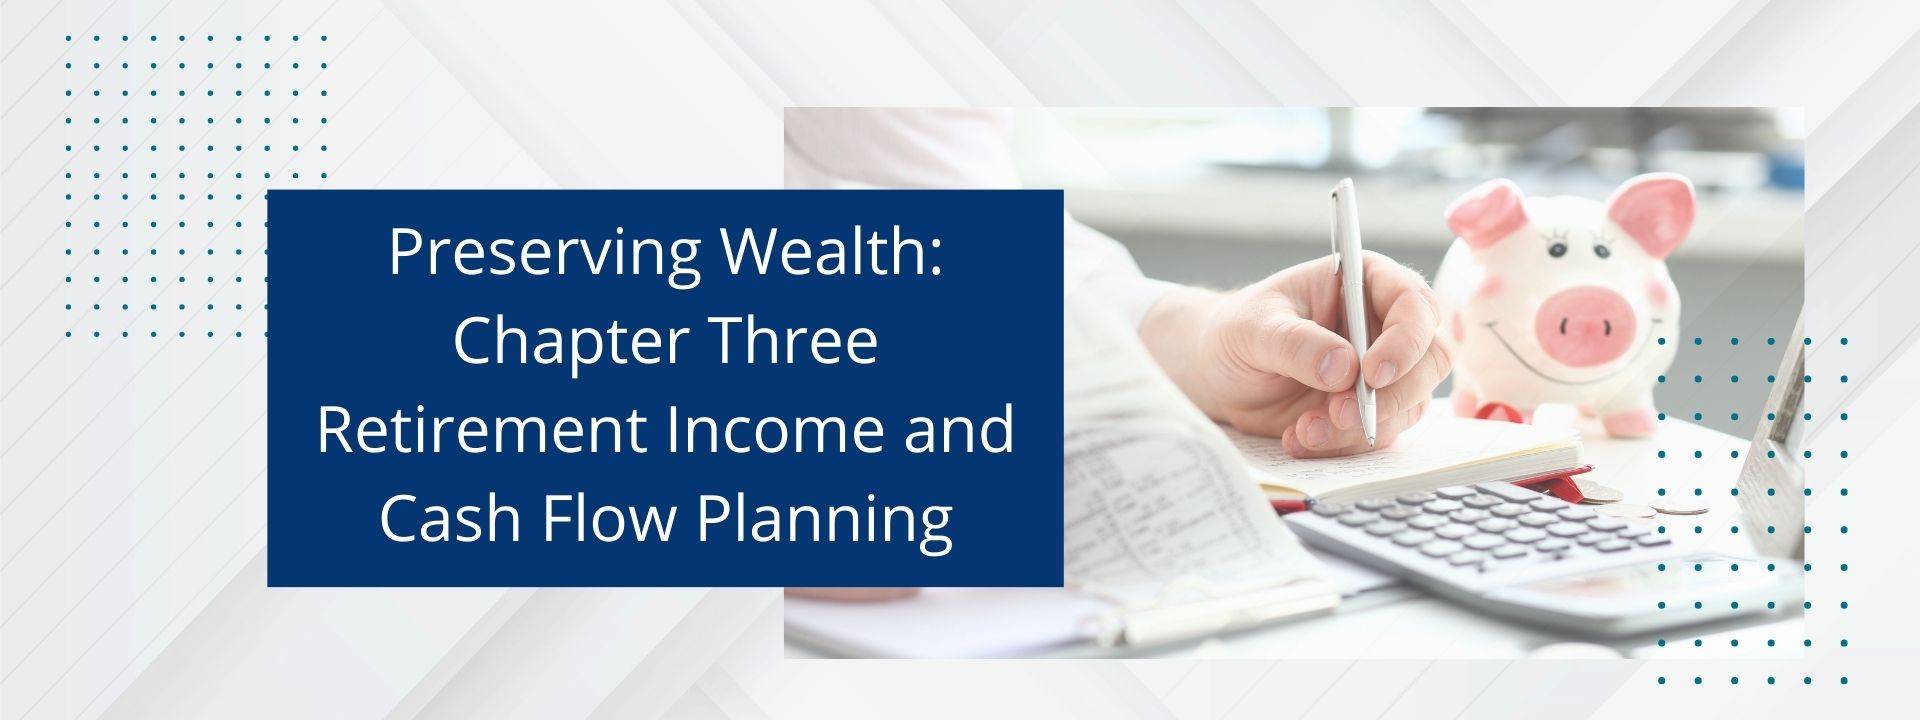 Chapter Three of Preserving Wealth discusses Retirement Income and Cash Flow with Author Jack Lumsden, MBA, CFP.